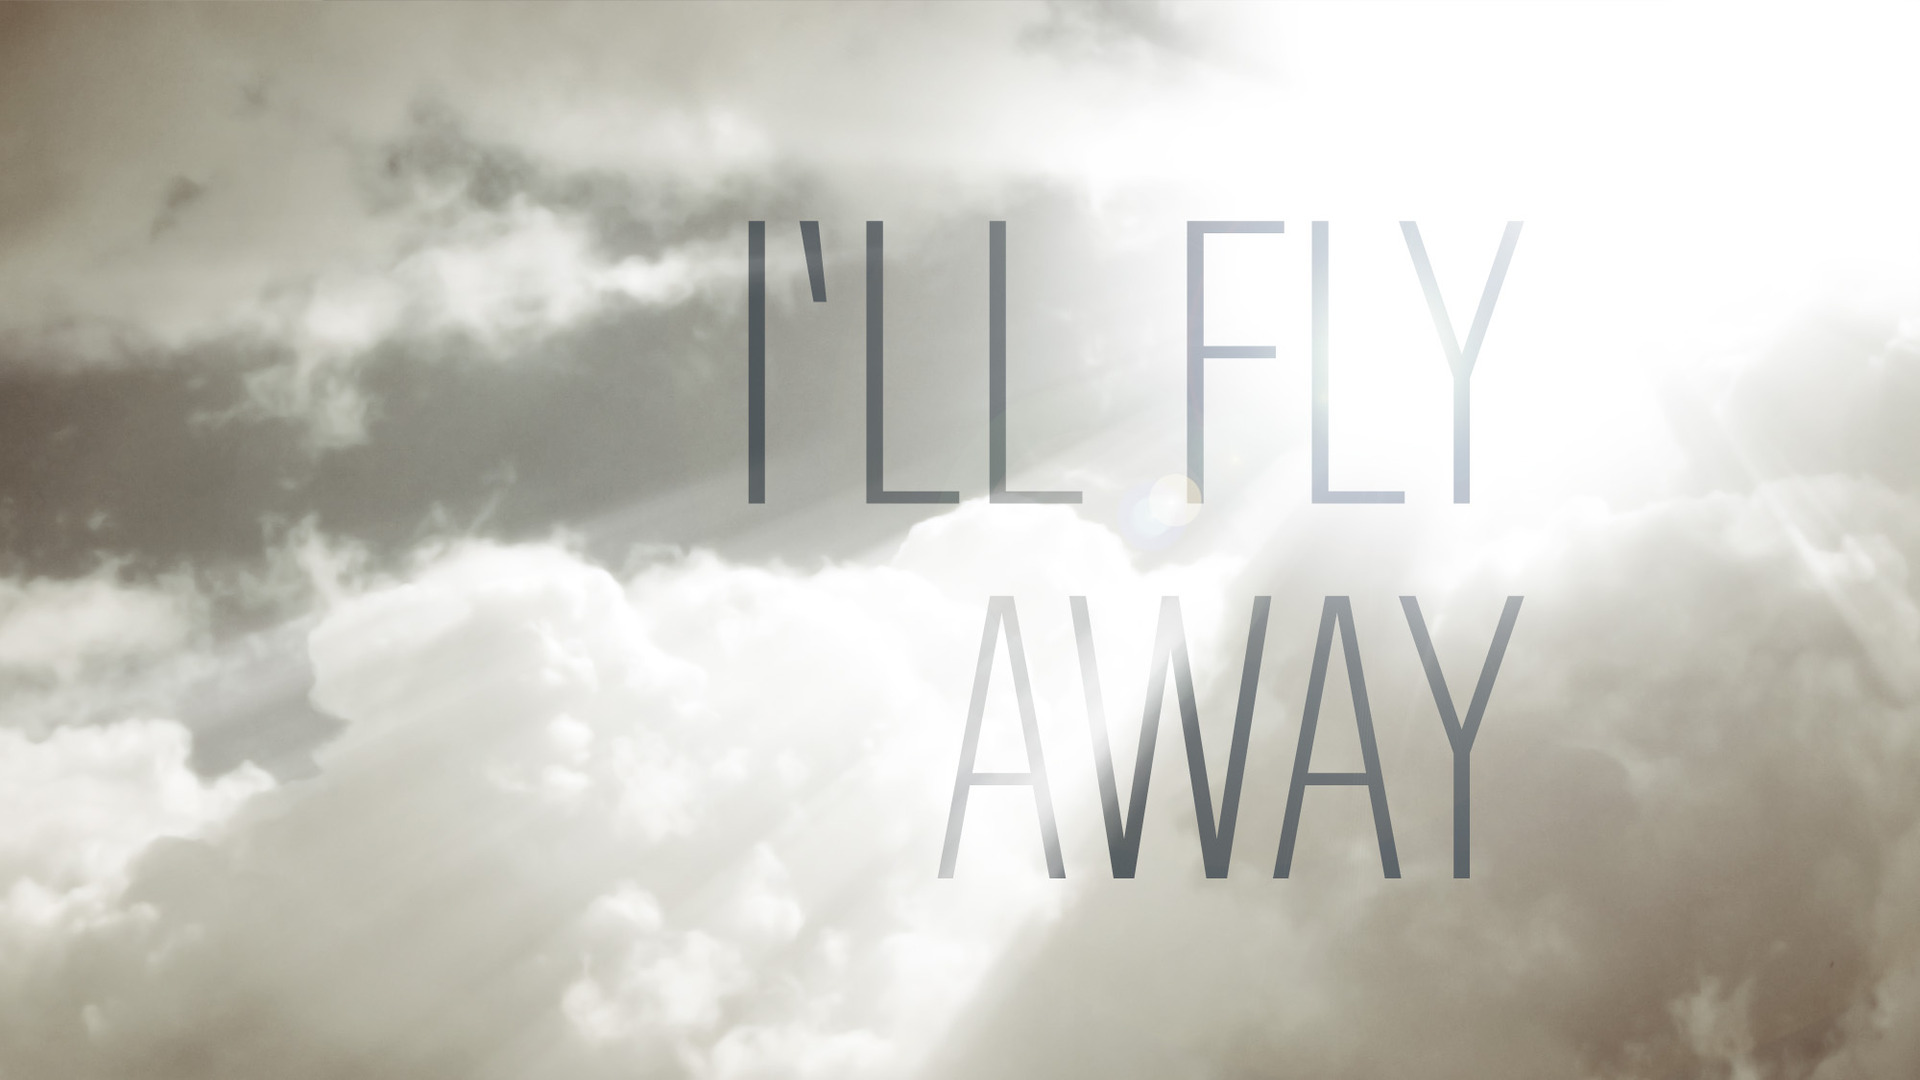 I'll Fly Away: The Rapture